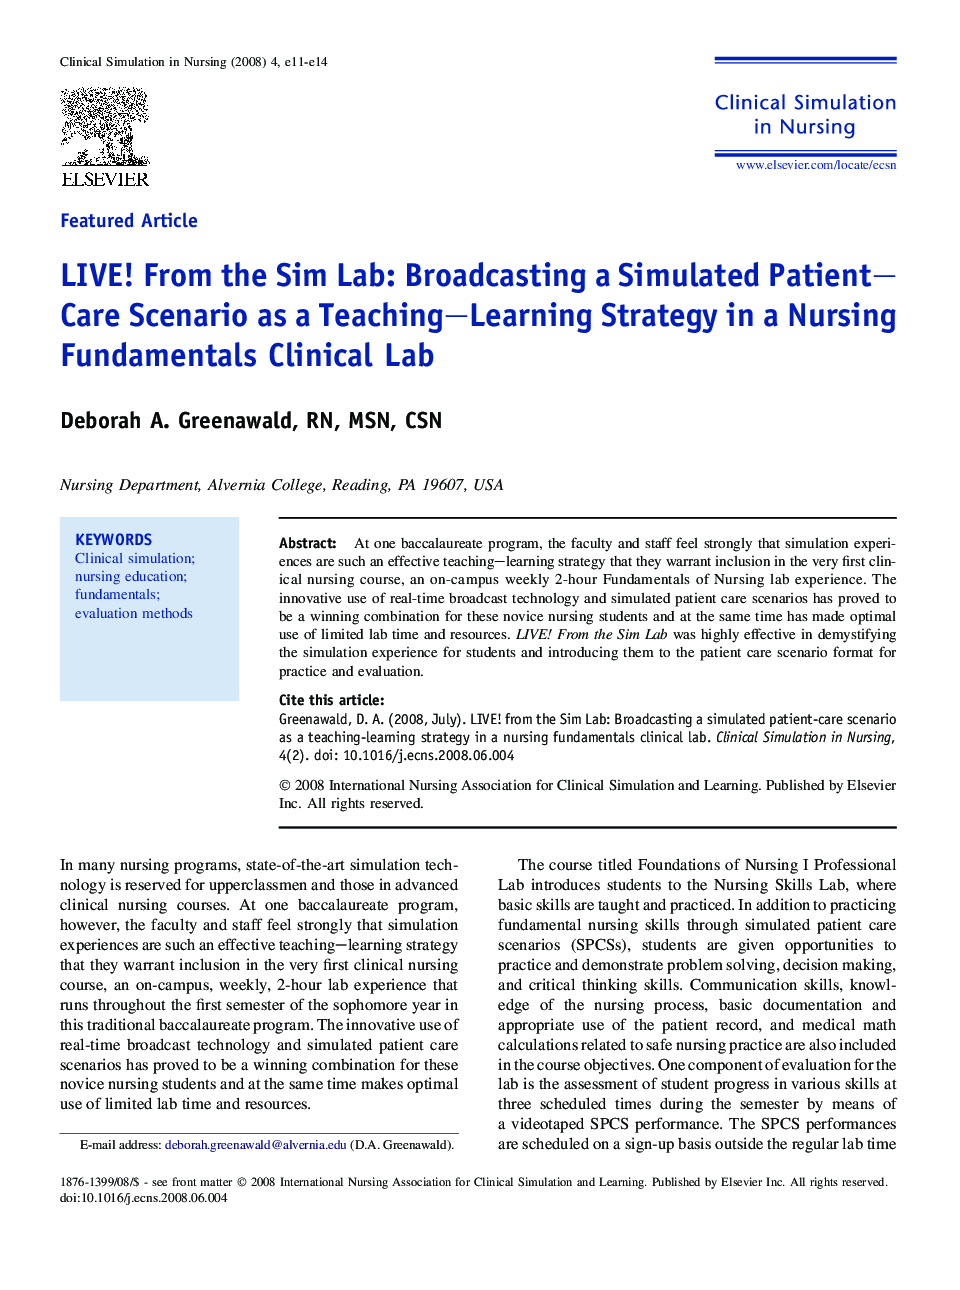 LIVE! From the Sim Lab: Broadcasting a Simulated Patient–Care Scenario as a Teaching–Learning Strategy in a Nursing Fundamentals Clinical Lab 